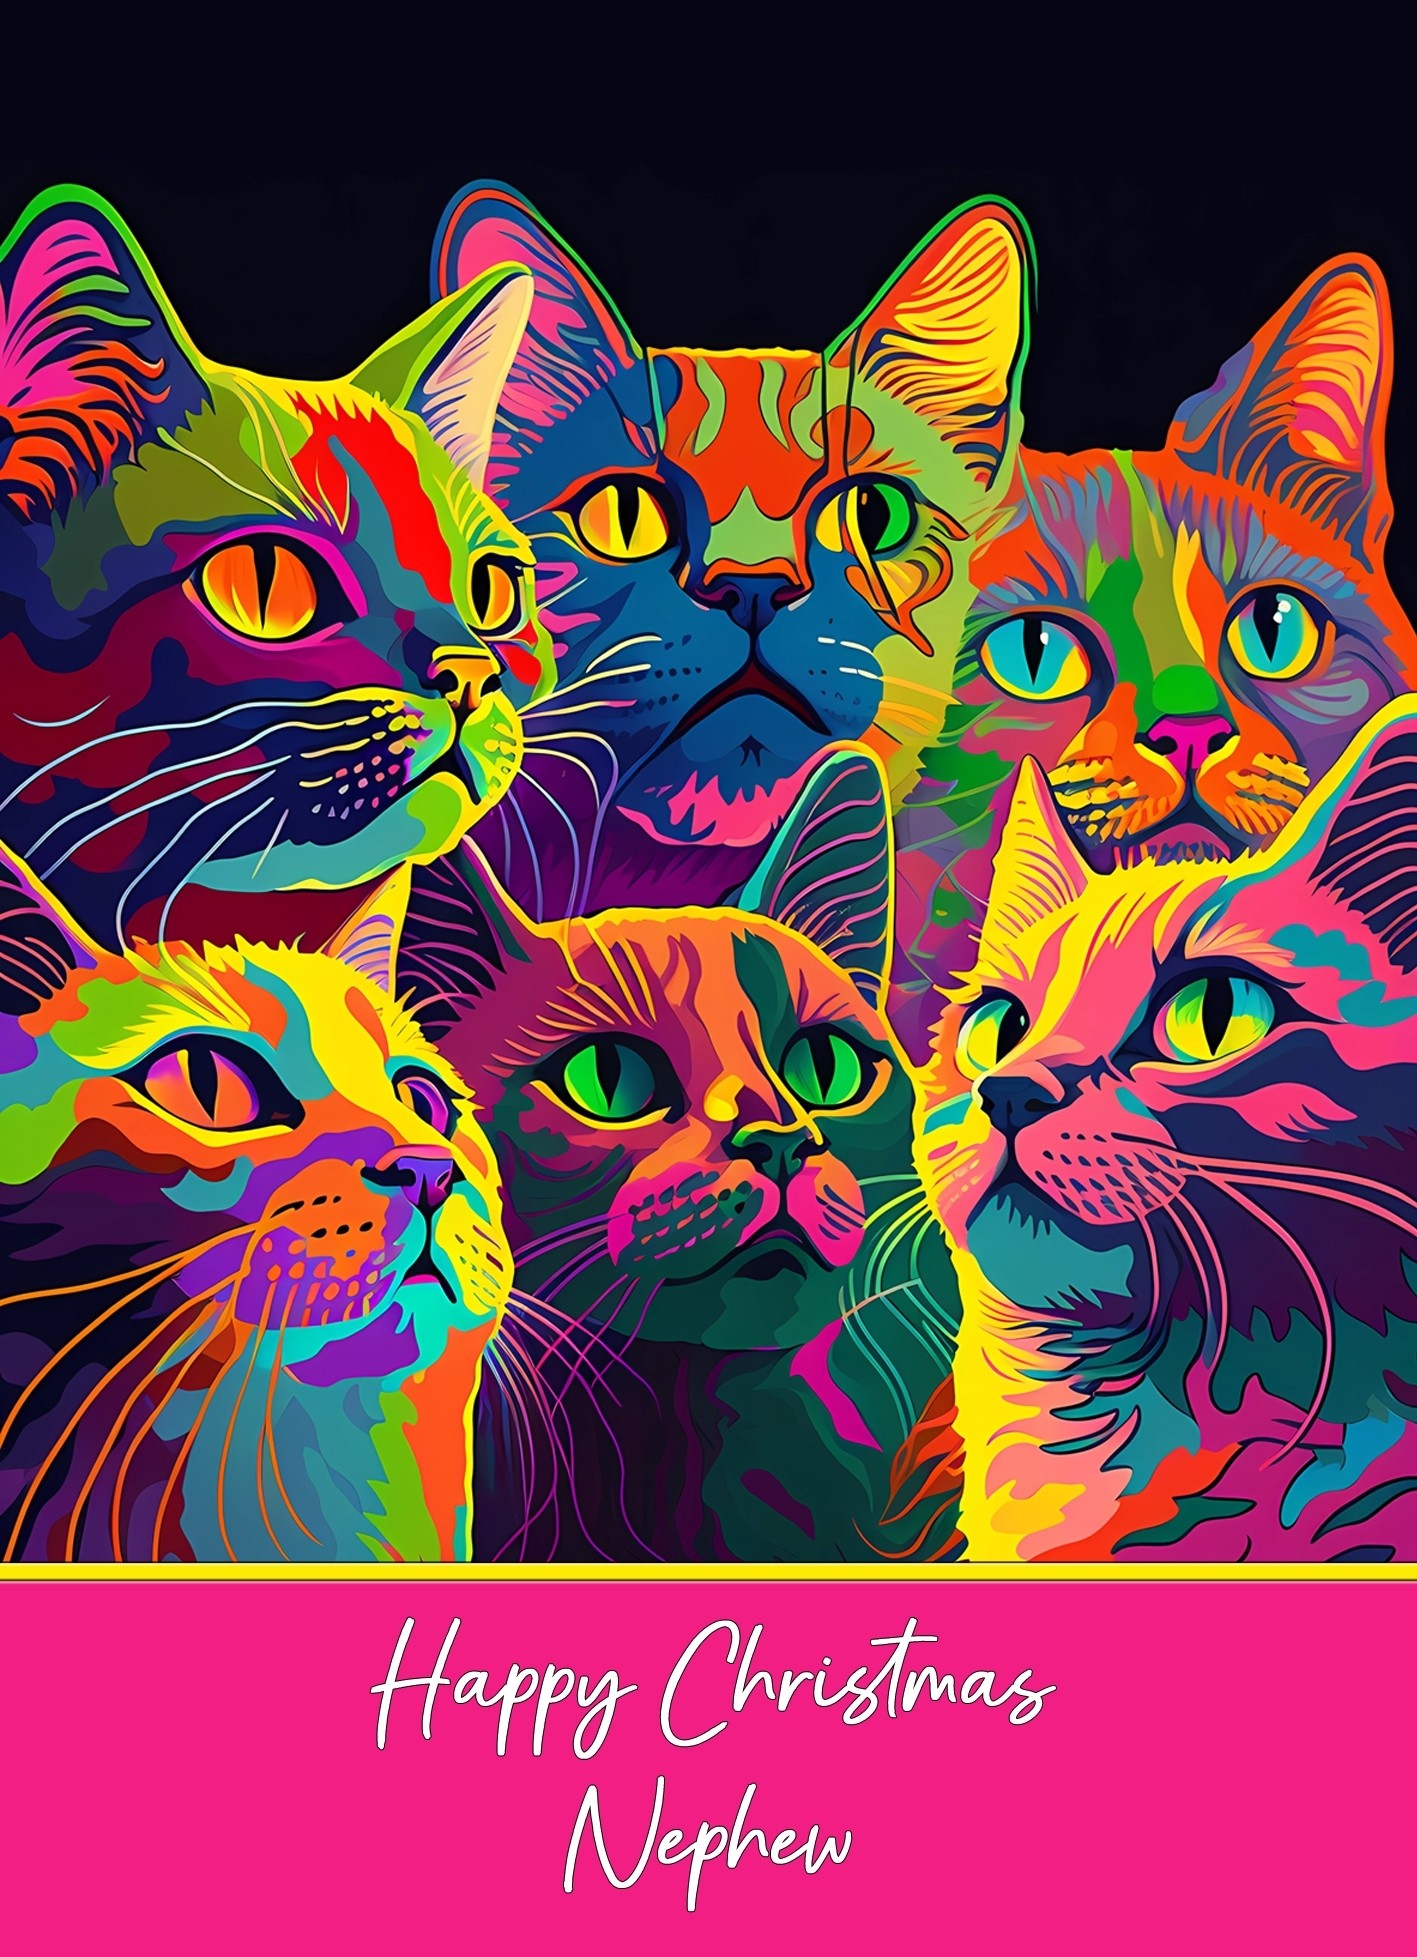 Christmas Card For Nephew (Colourful Cat Art)